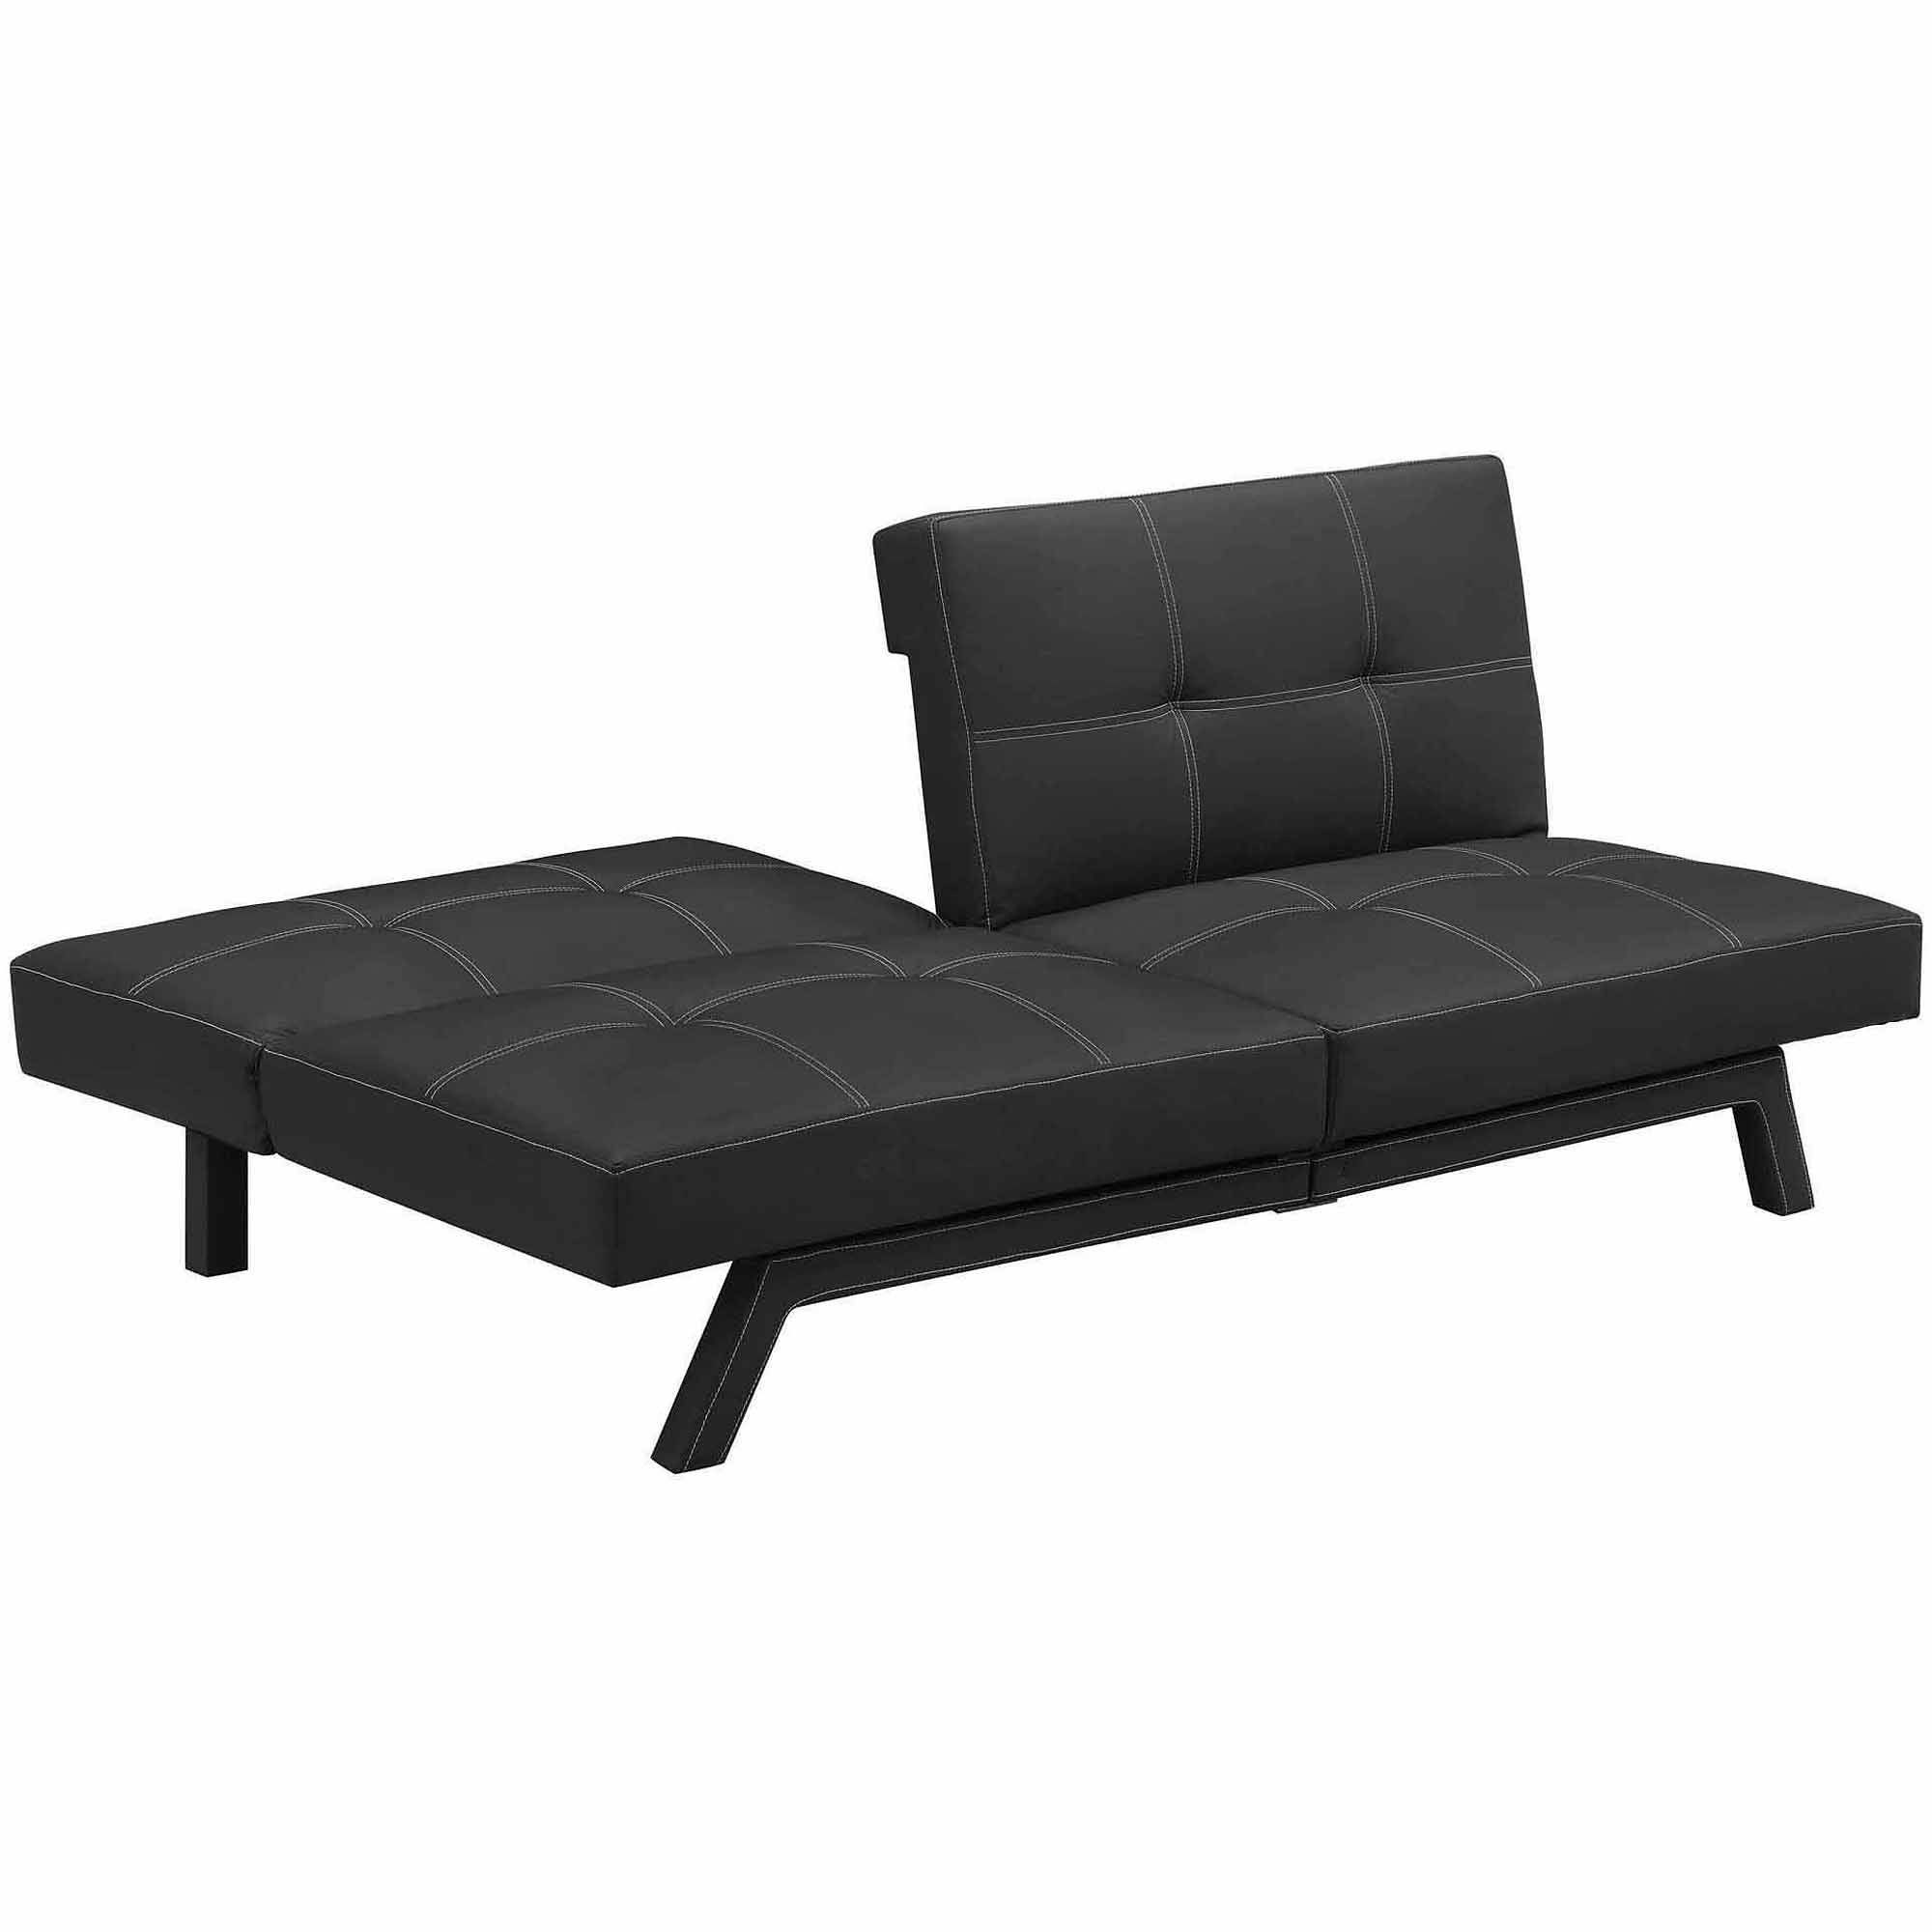 Delaney Split Back Futon Sofa Bed, Multiple Colors – Walmart In Sofa Lounger Beds (View 28 of 30)